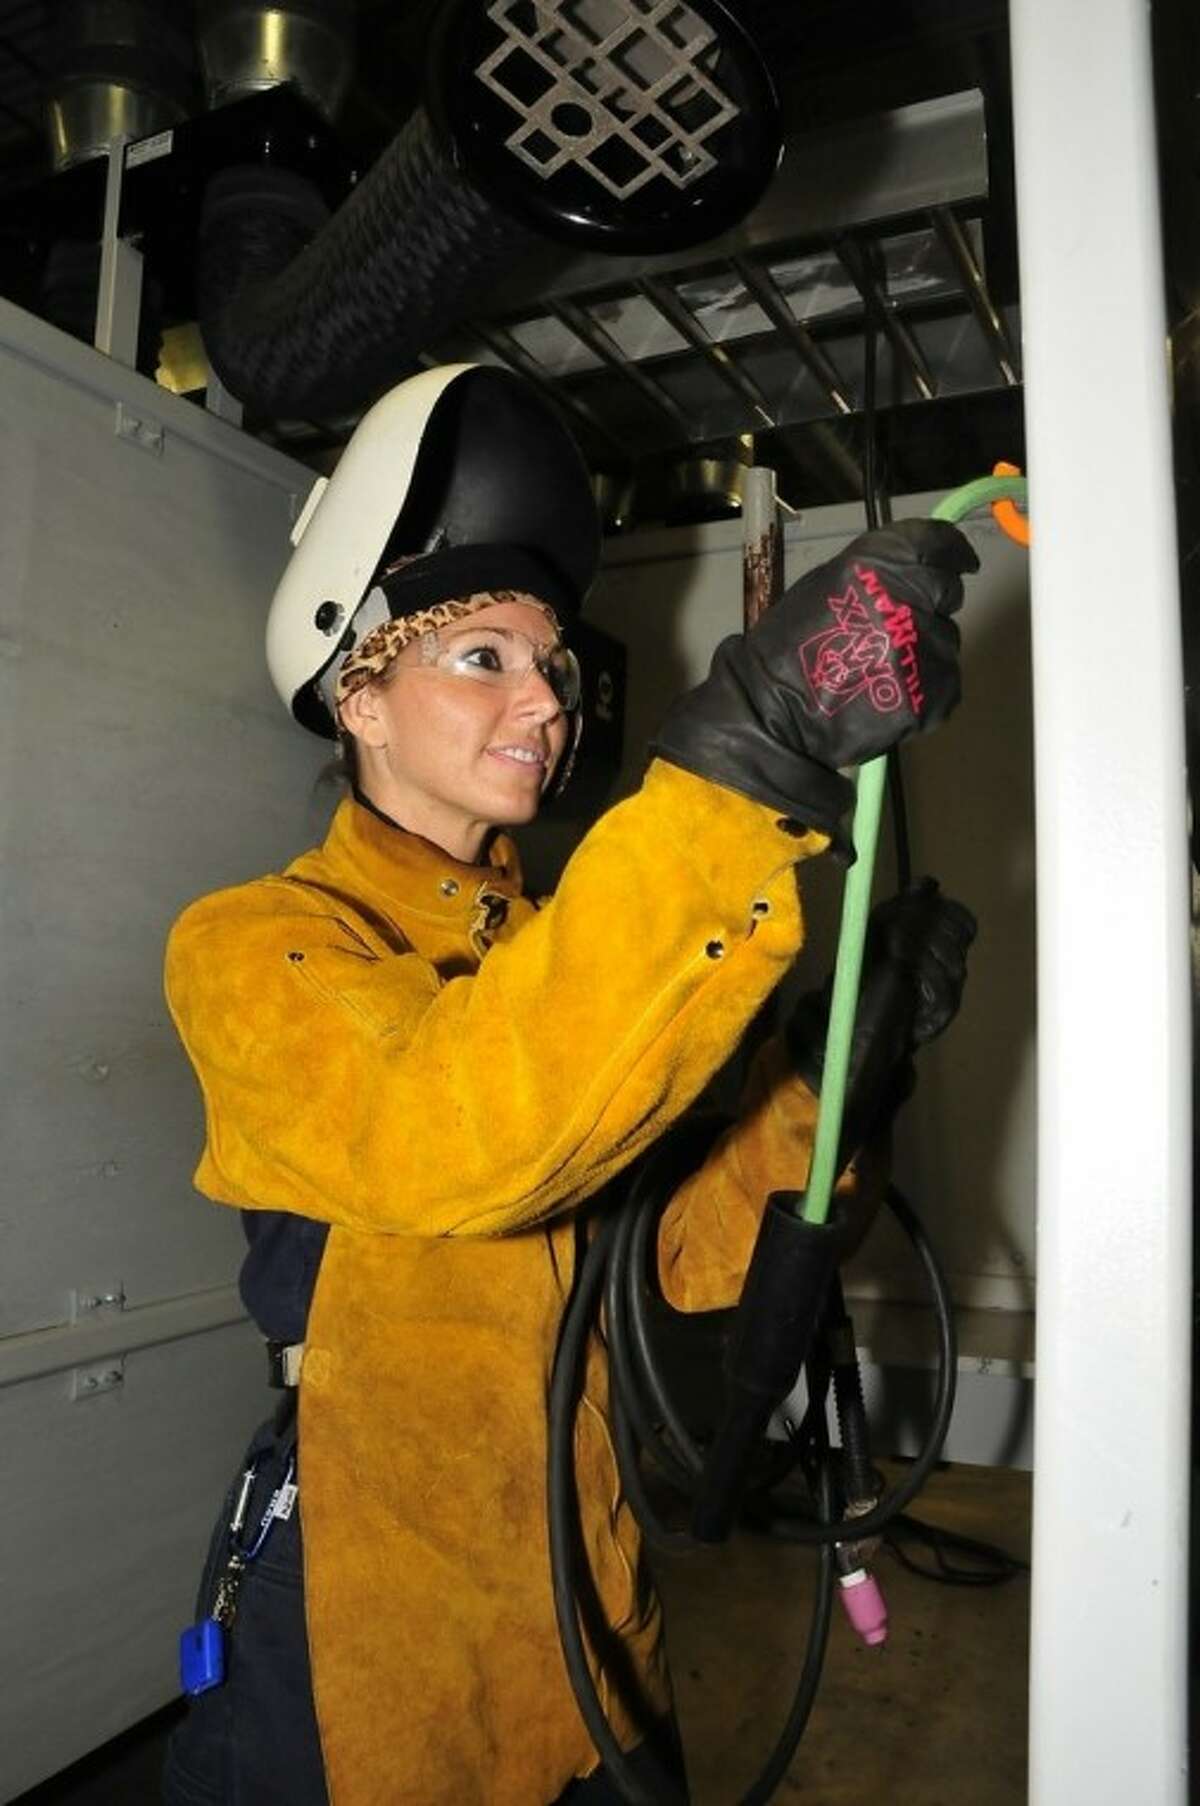 Amber Gell of Clear Lake, an experiment support scientist working on the International Space Station Medical Project, spends her evenings in welding class at San Jacinto College to learn the skill for various research projects related to human space flight.